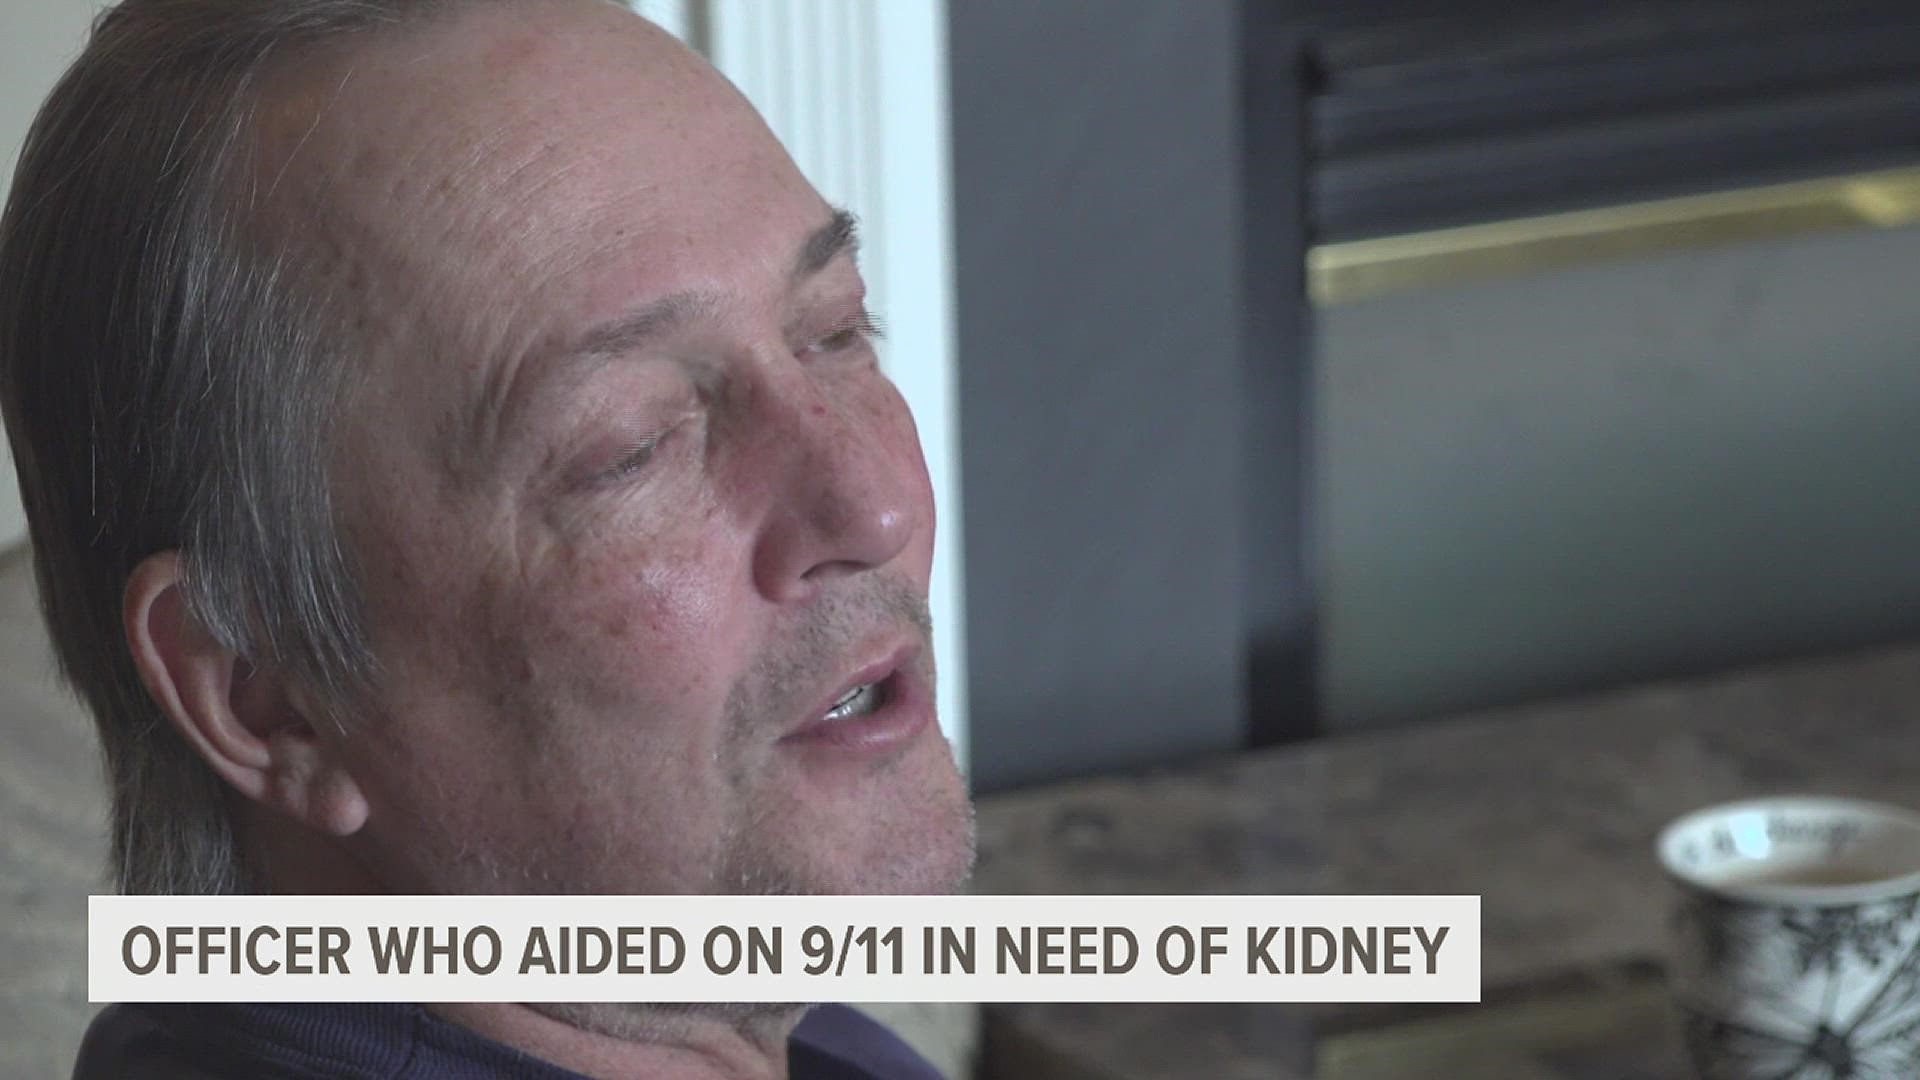 Former NYPD Sergeant who helped identify first responders during 9/11 is in need of a kidney